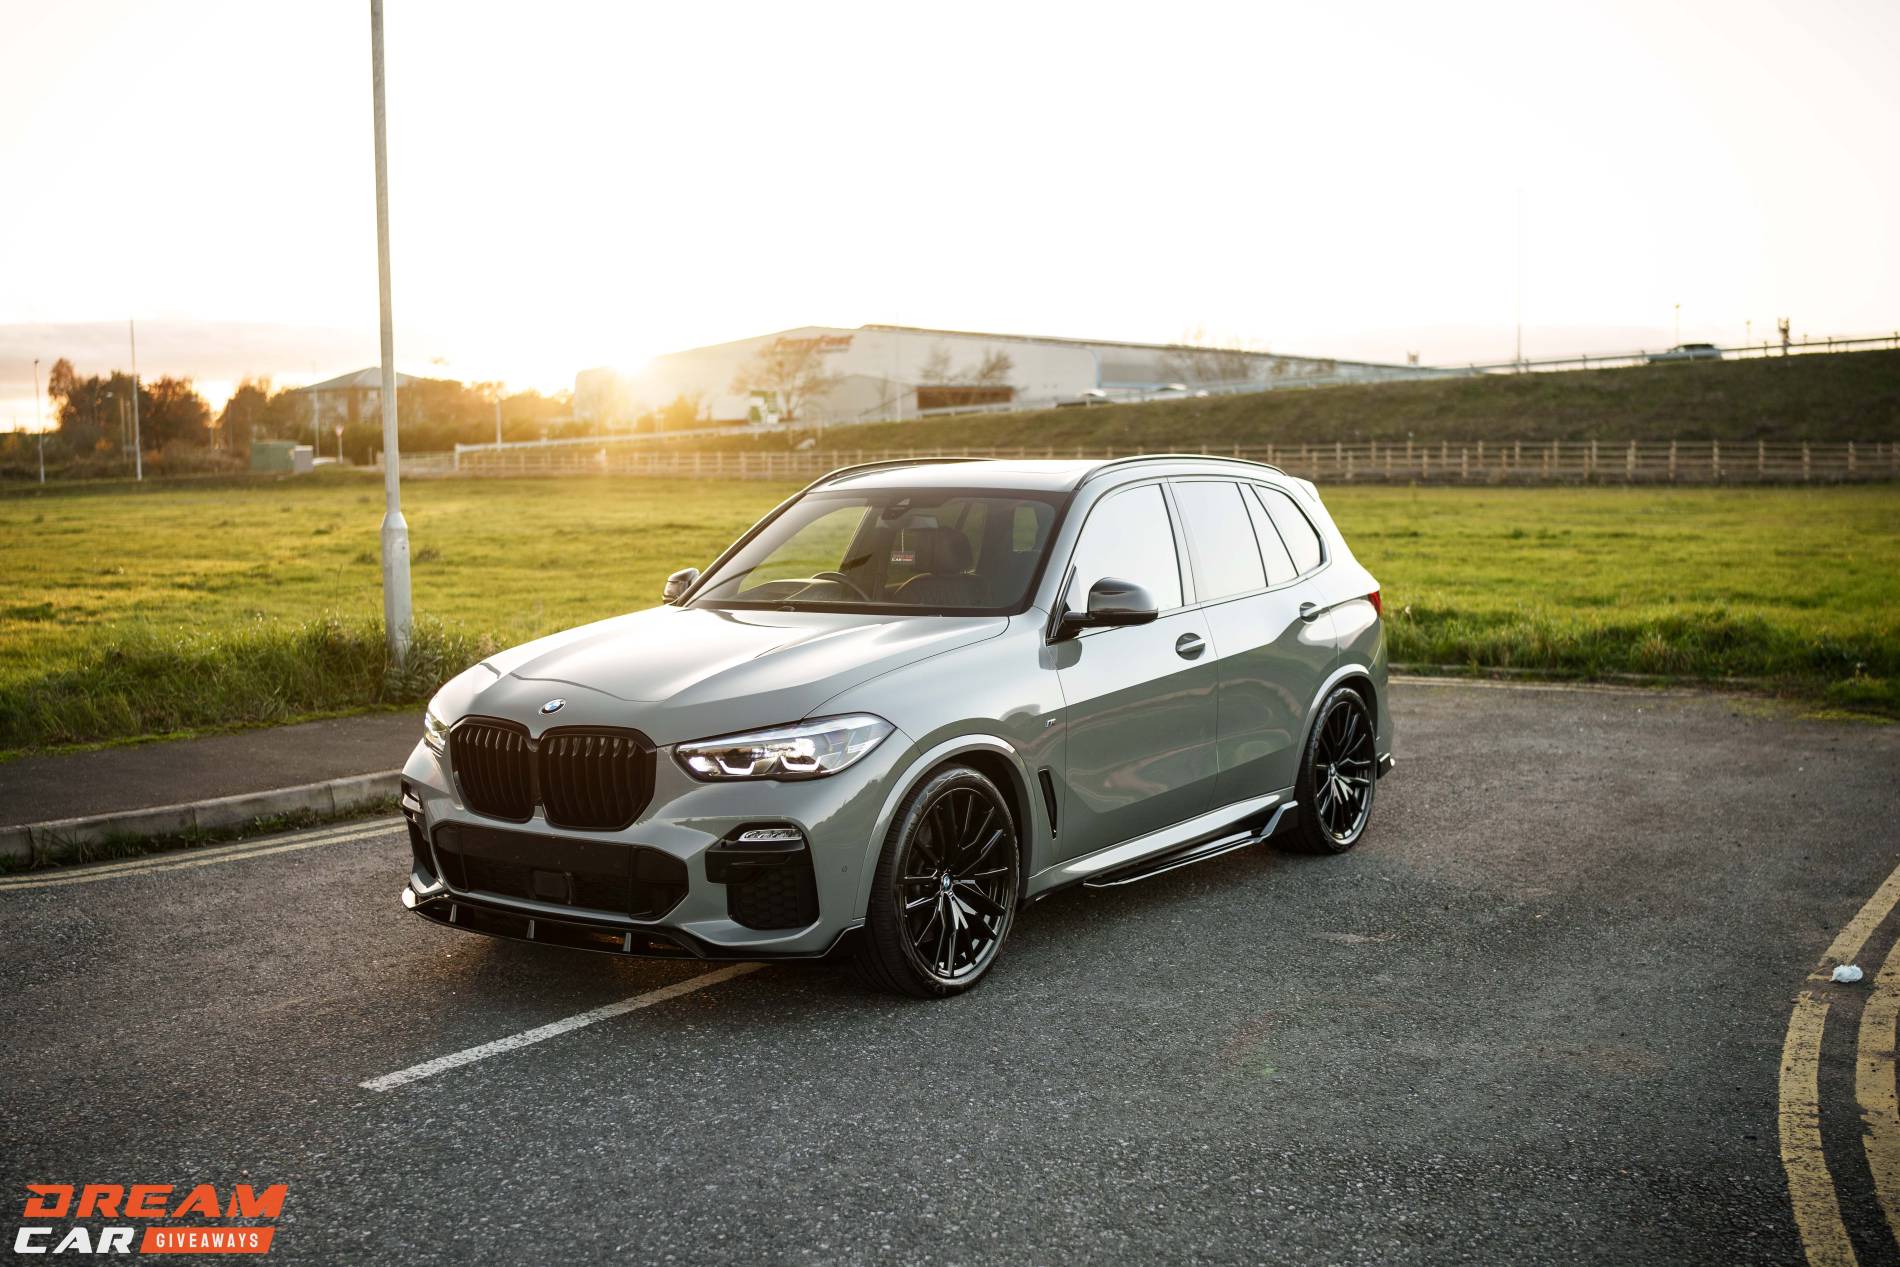 Win this 2021 BMW X5 40D & £2,000 or £45,000 Tax Free